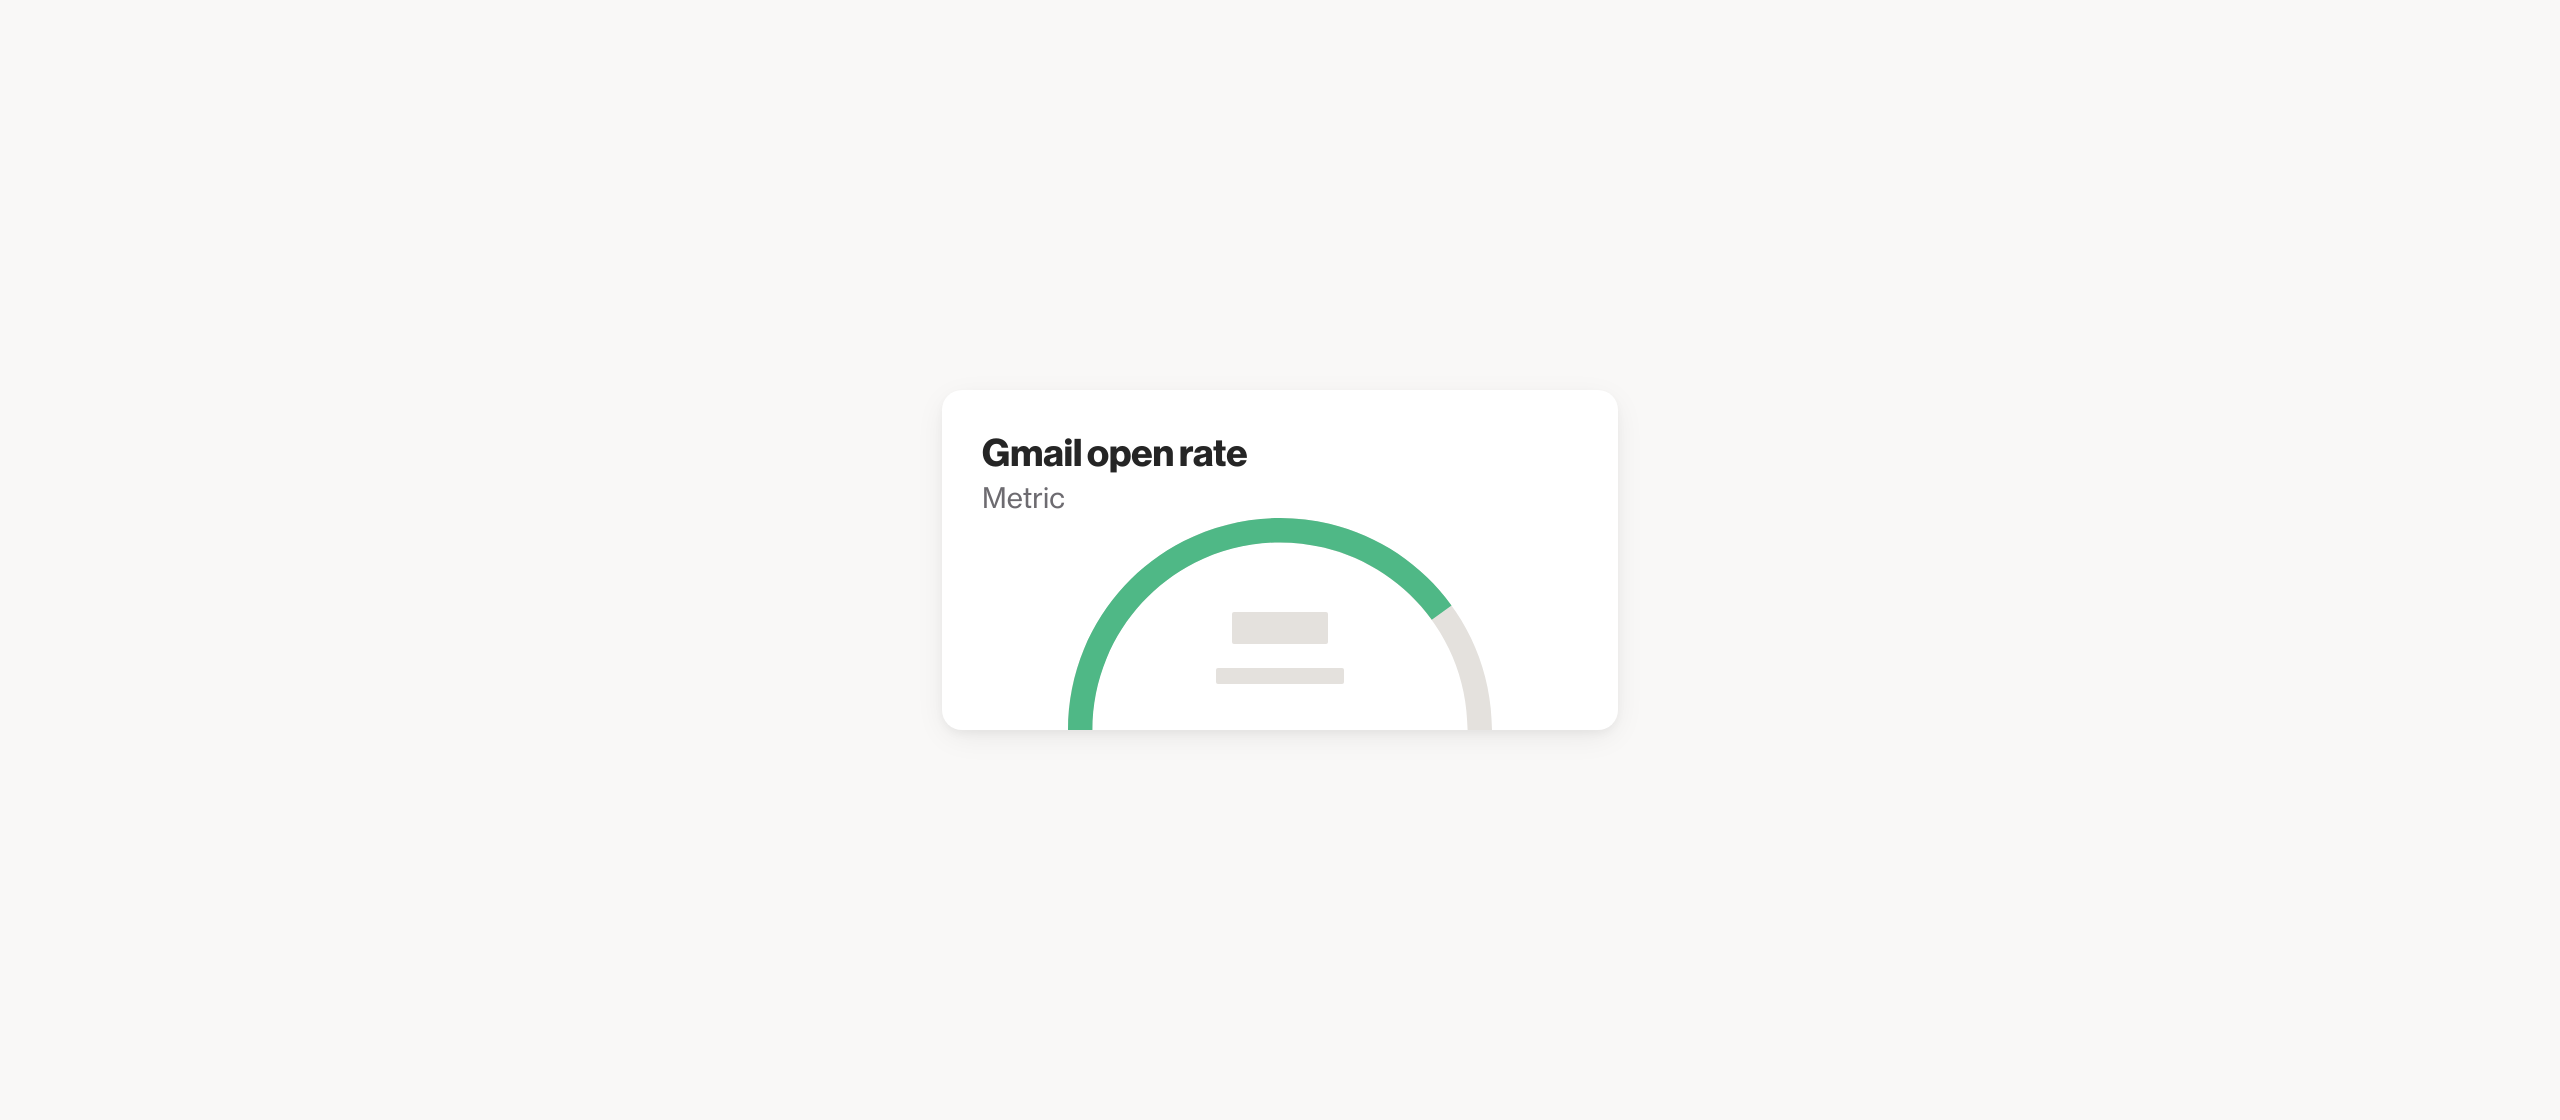 Gmail open rate metric